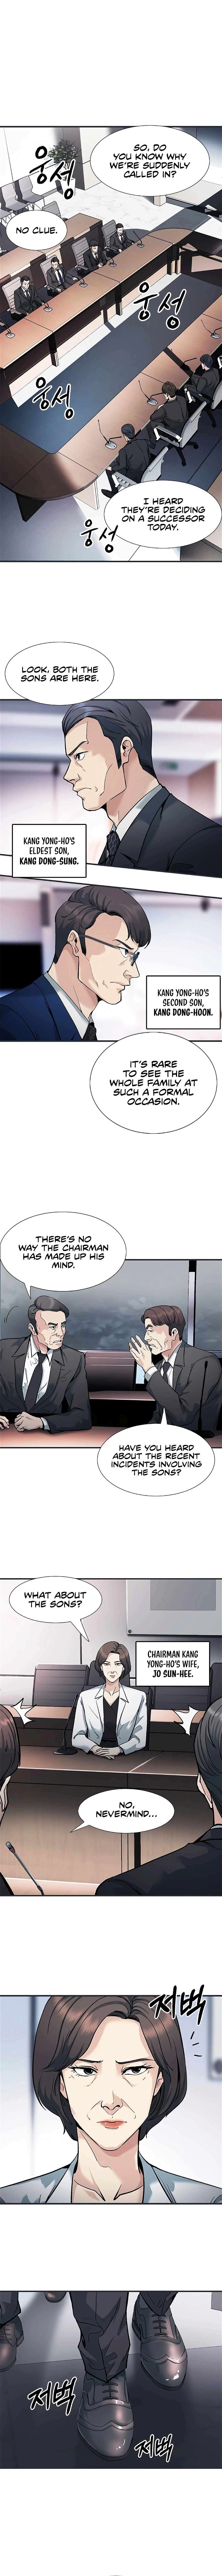 Chairman Kang: The Newcomer Chapter 1 page 3